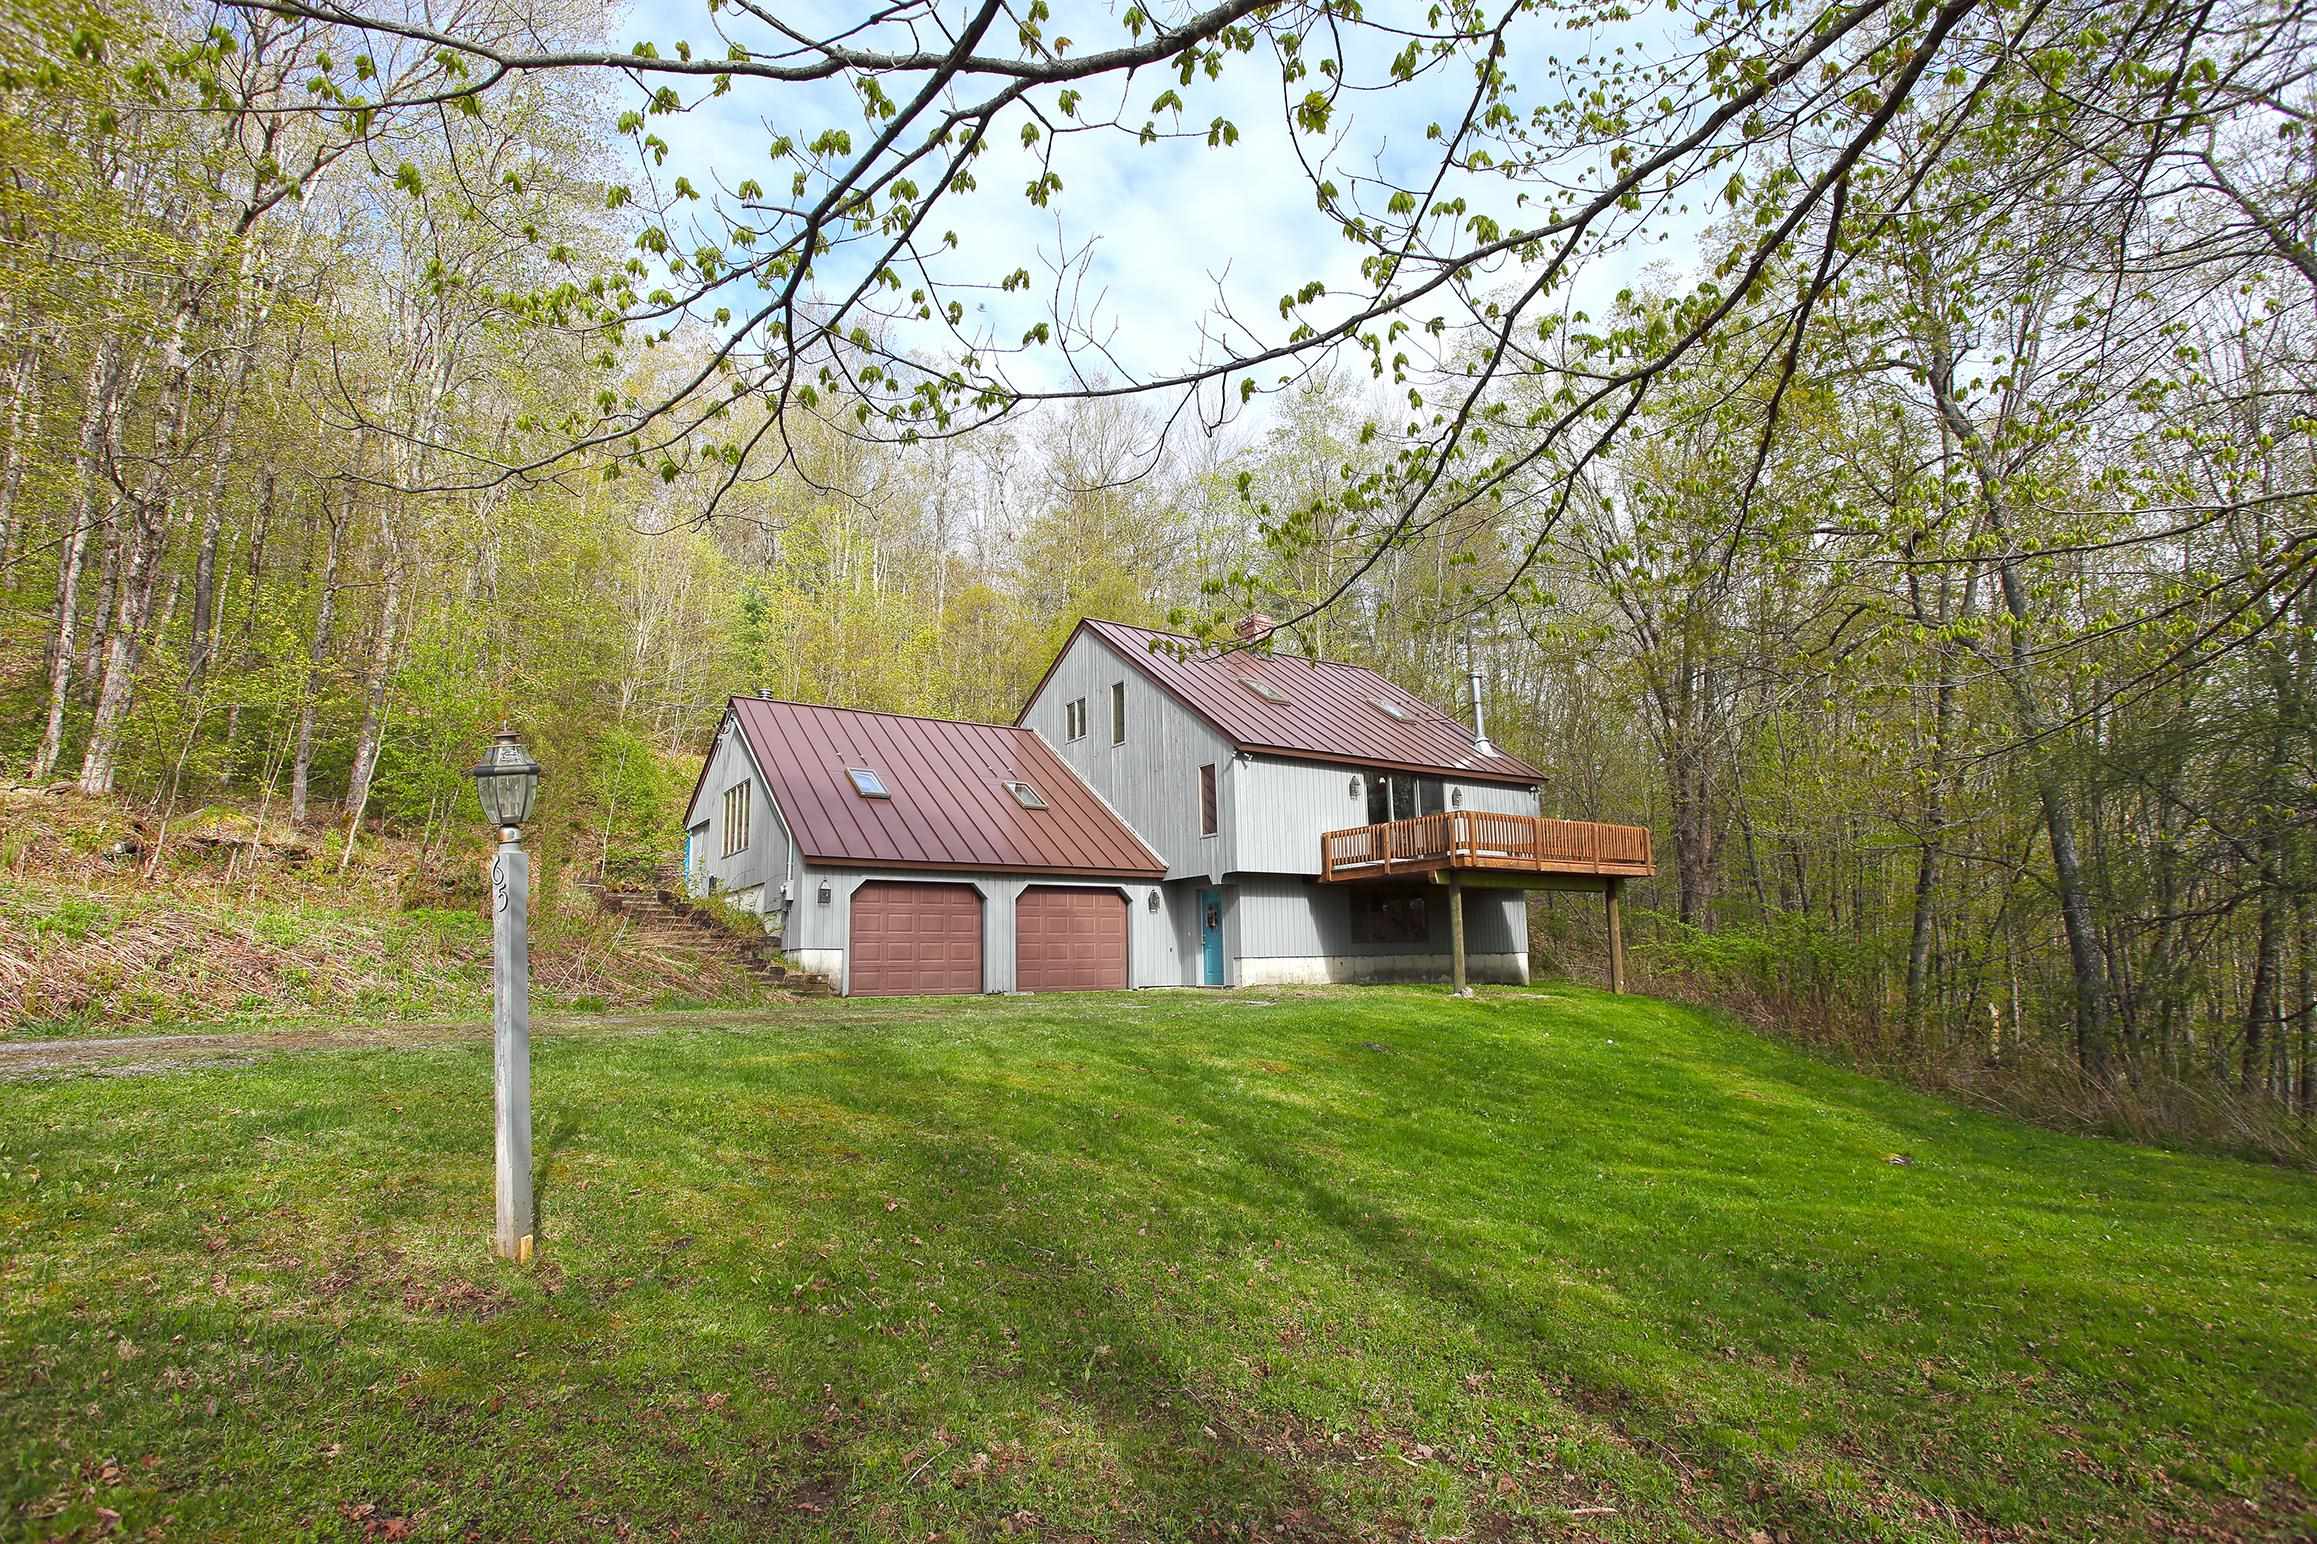 House sits on 10 acres +/-, additional lot of 32...